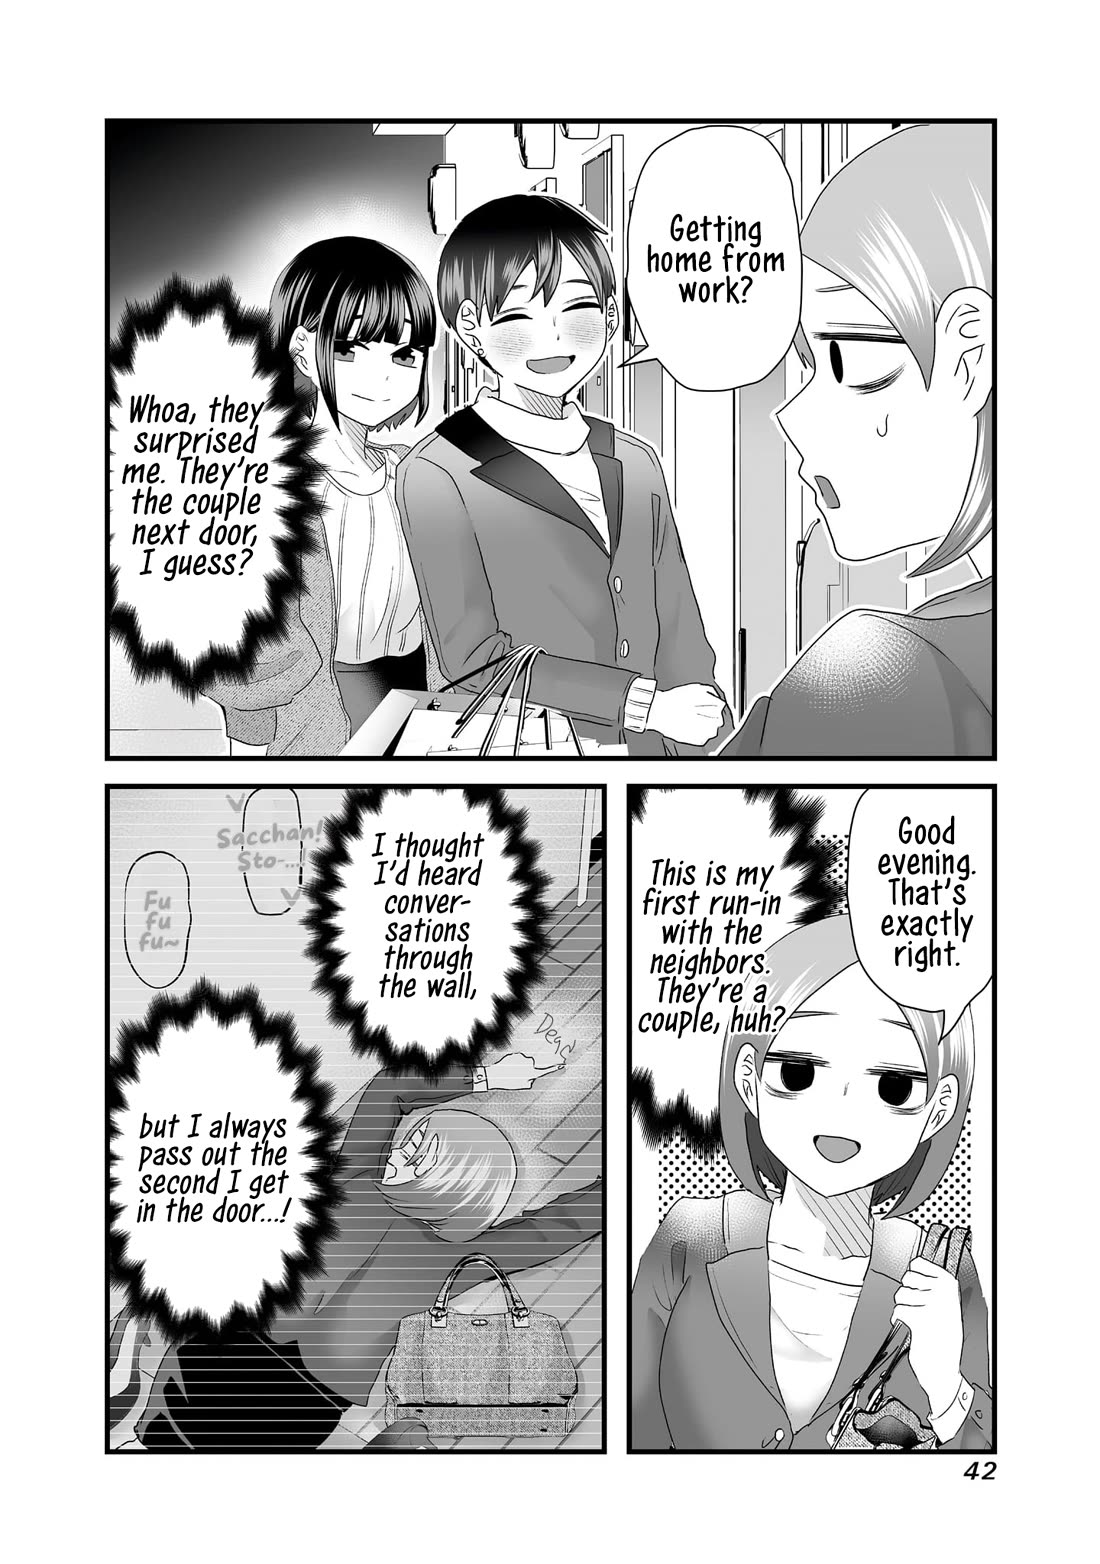 Sacchan and Ken-chan Are Going at it Again - chapter 5 - #4